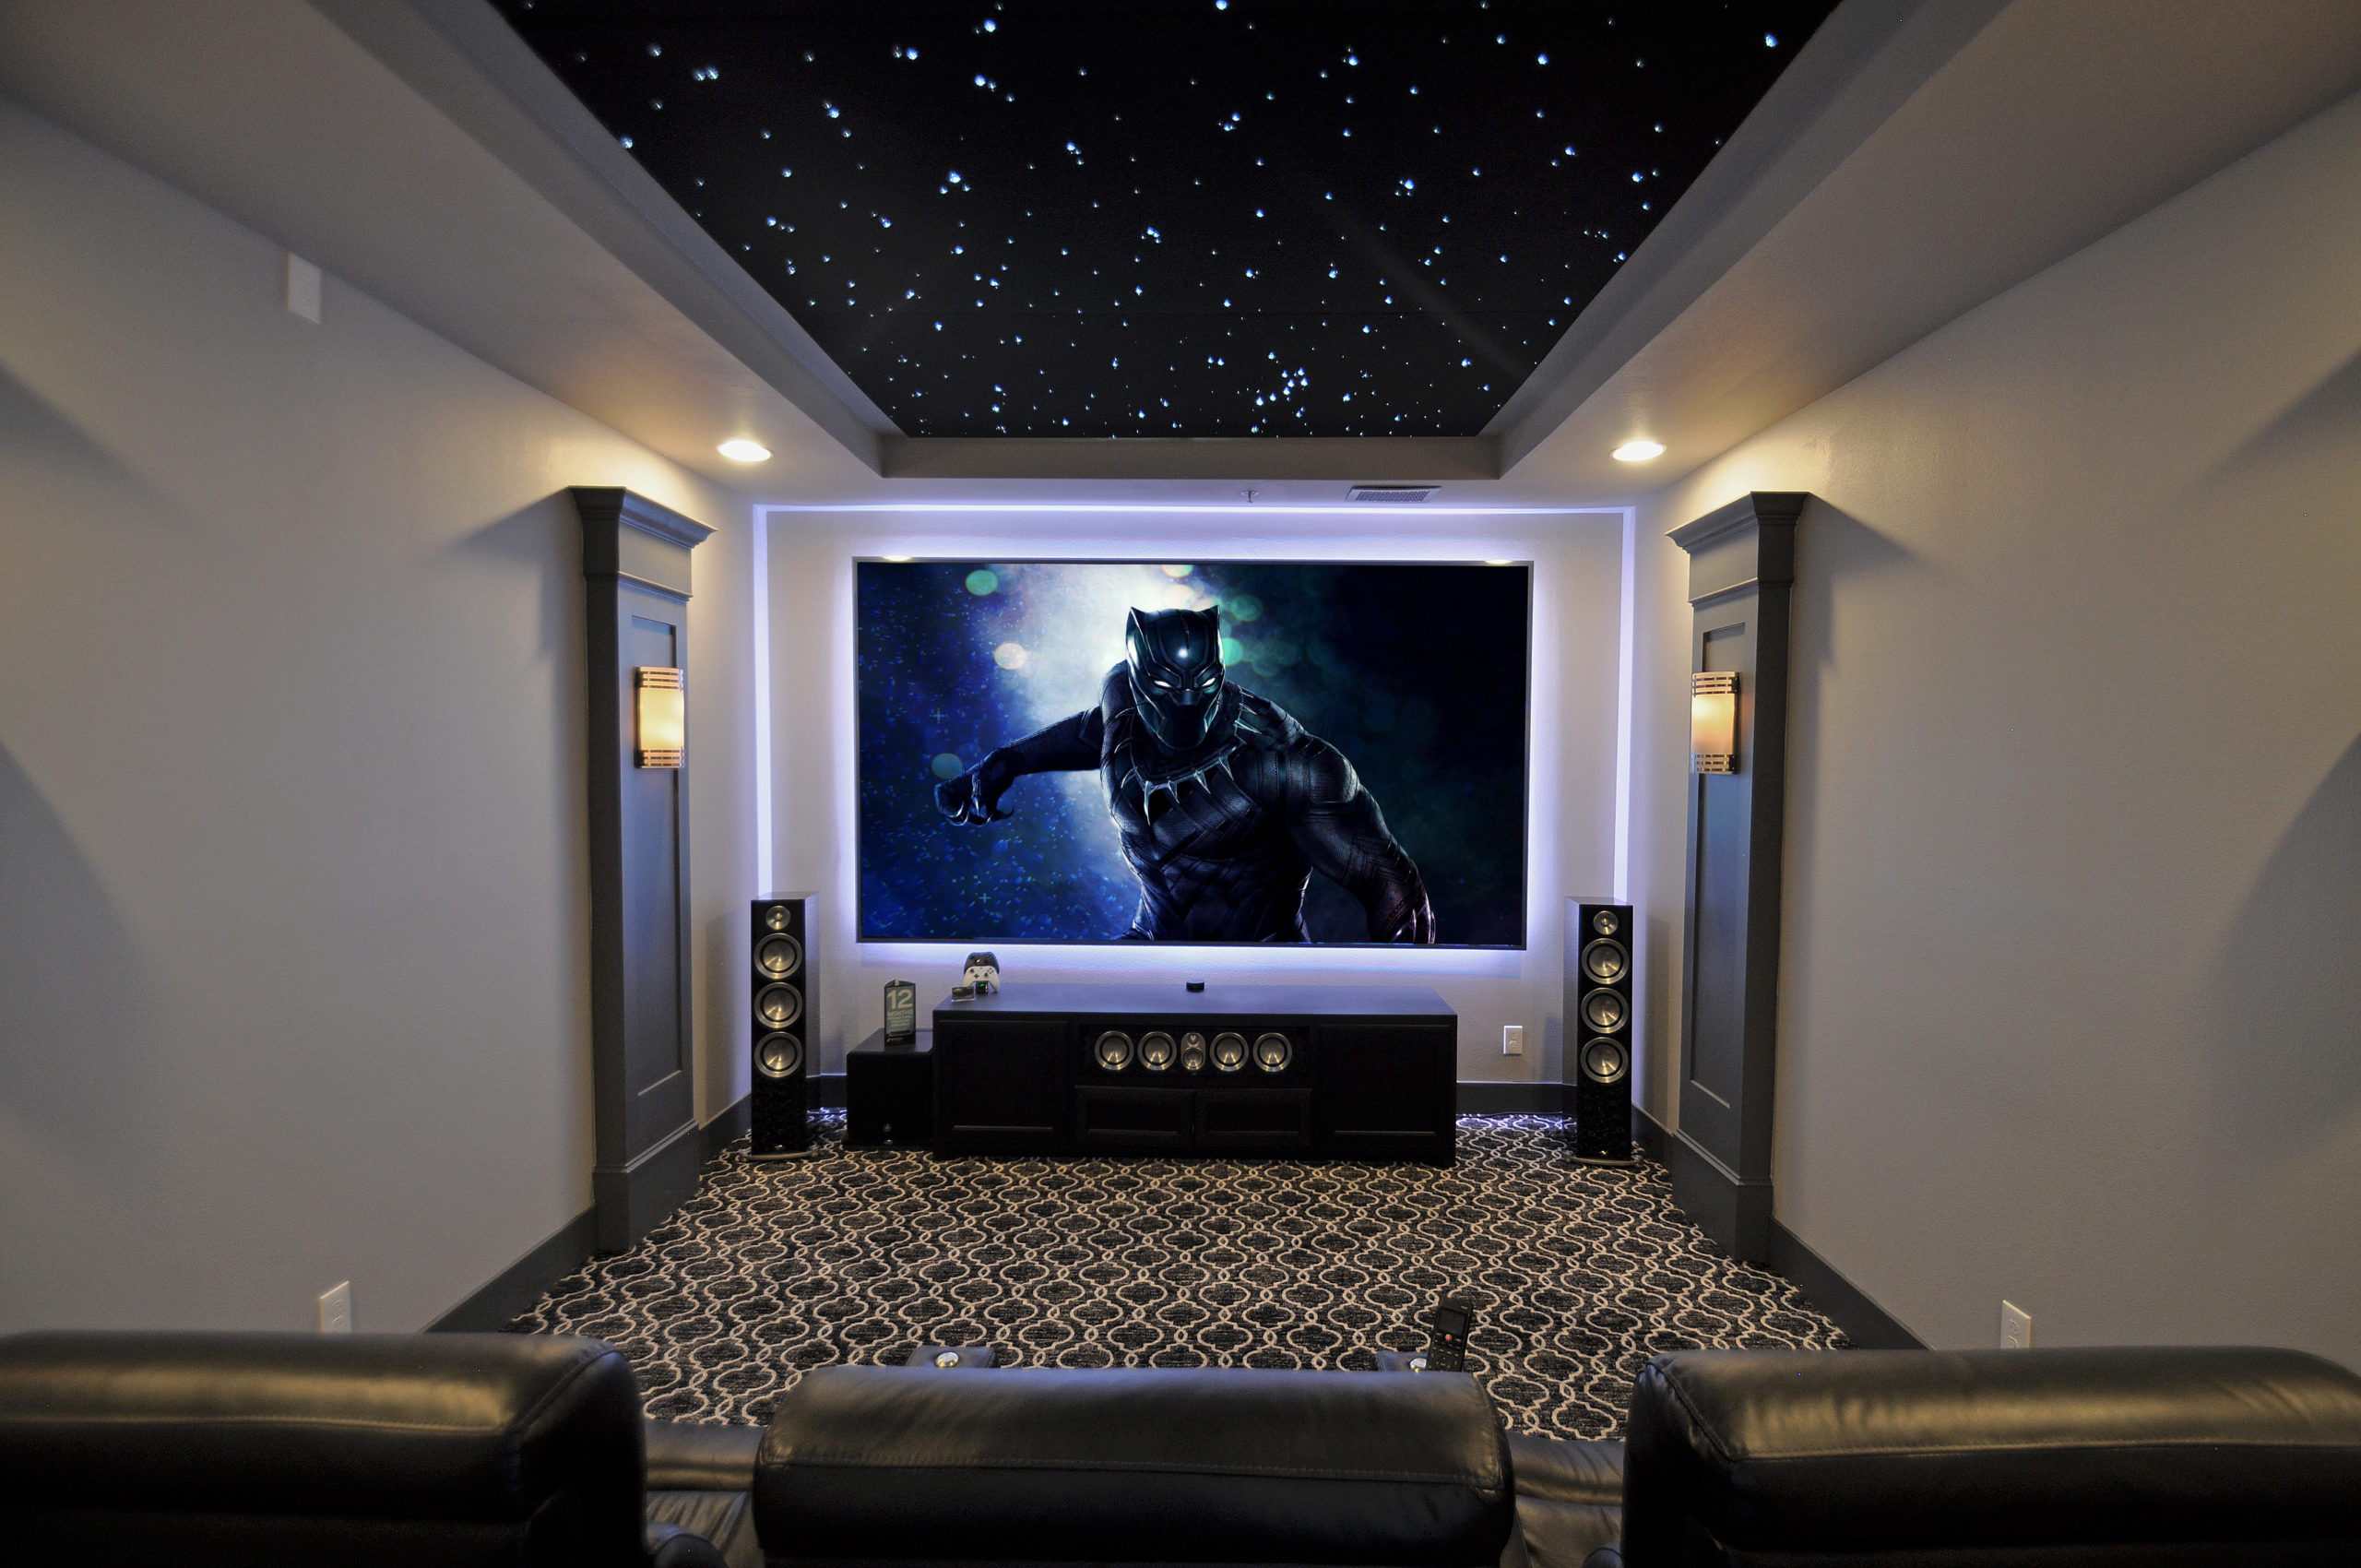 Best Home Theater System in India 2020 Buyer's Guide